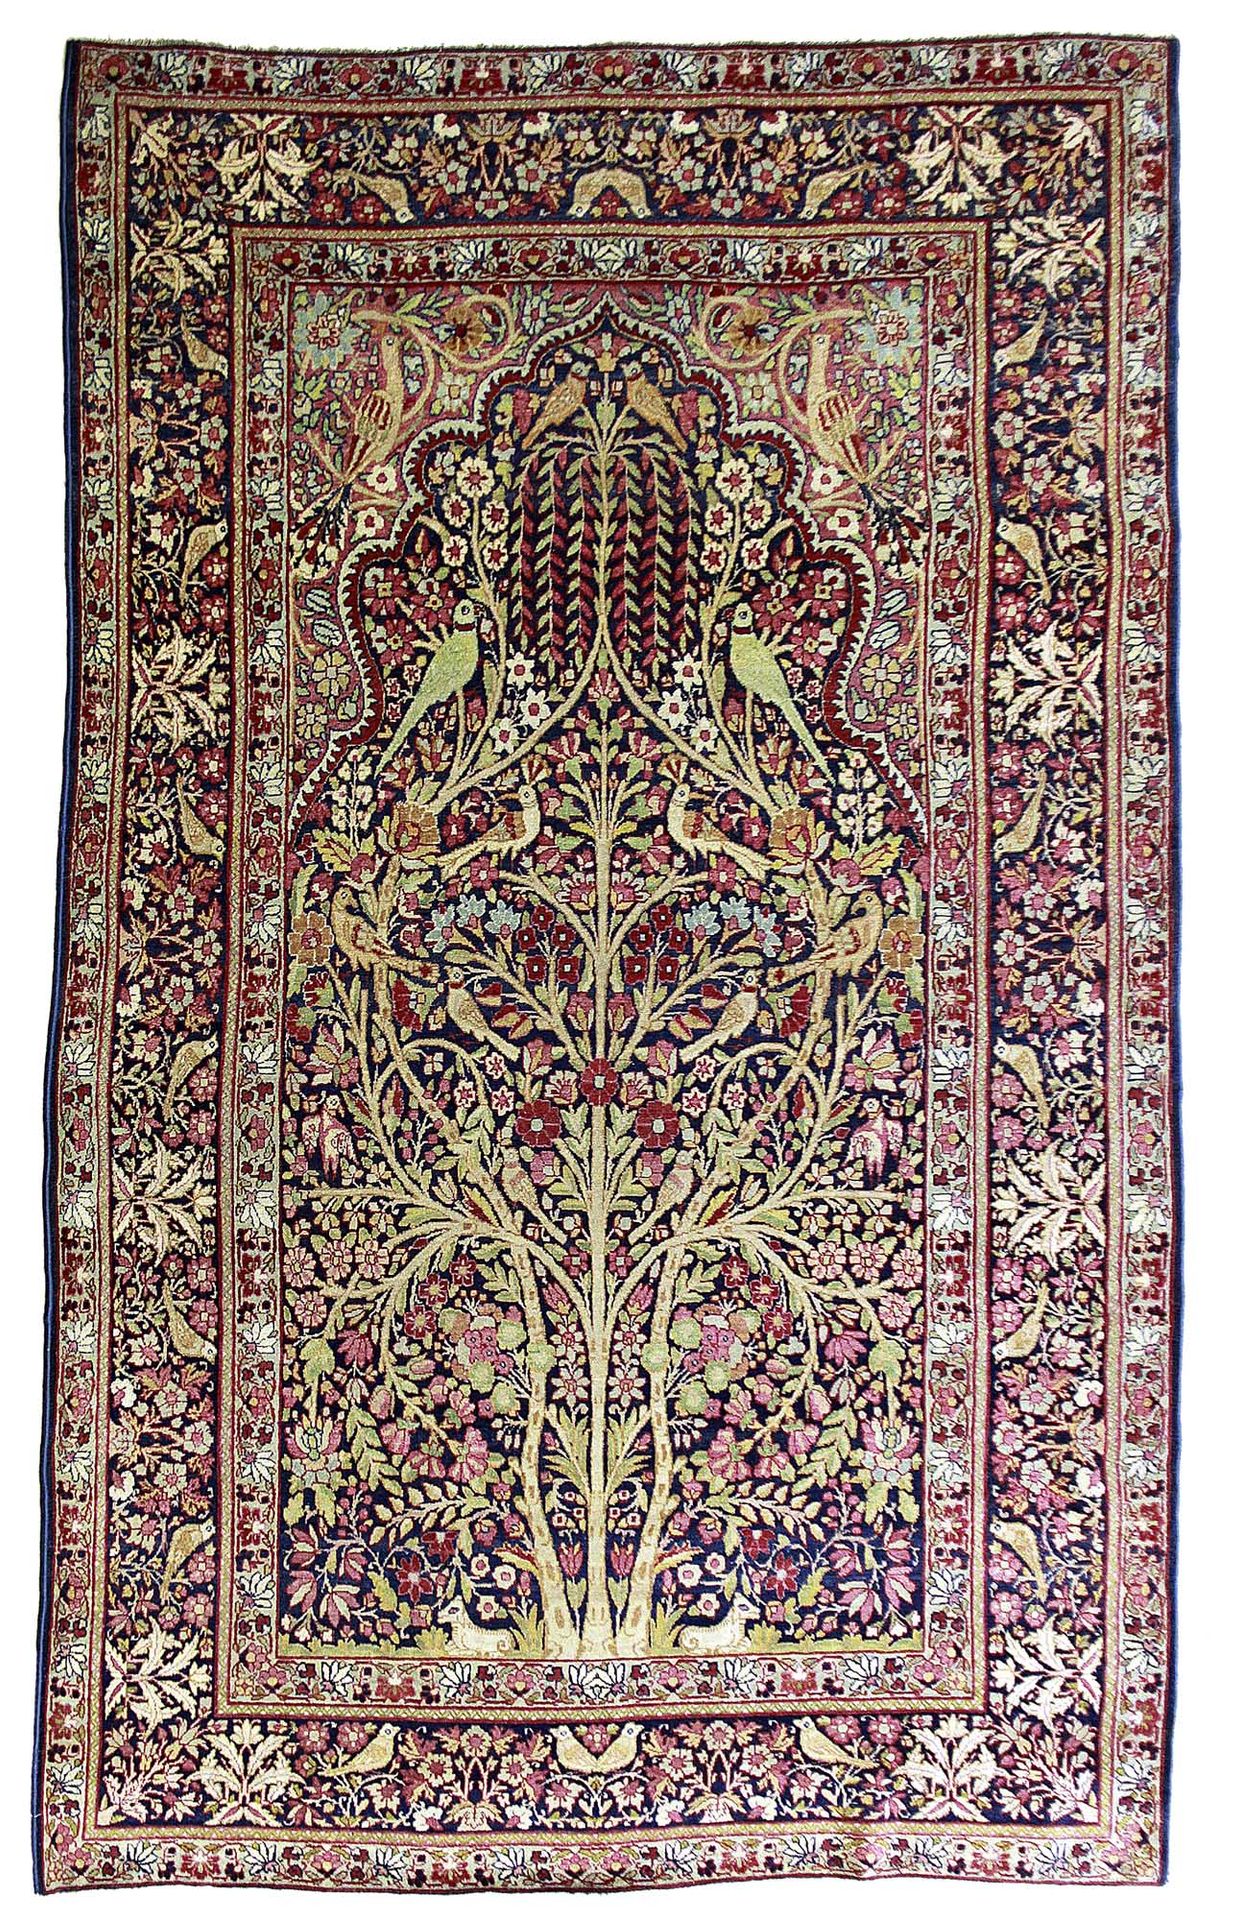 Null KIRMAN-LAVER carpet (Persia), end of the 19th century

Dimensions : 224 x 1&hellip;